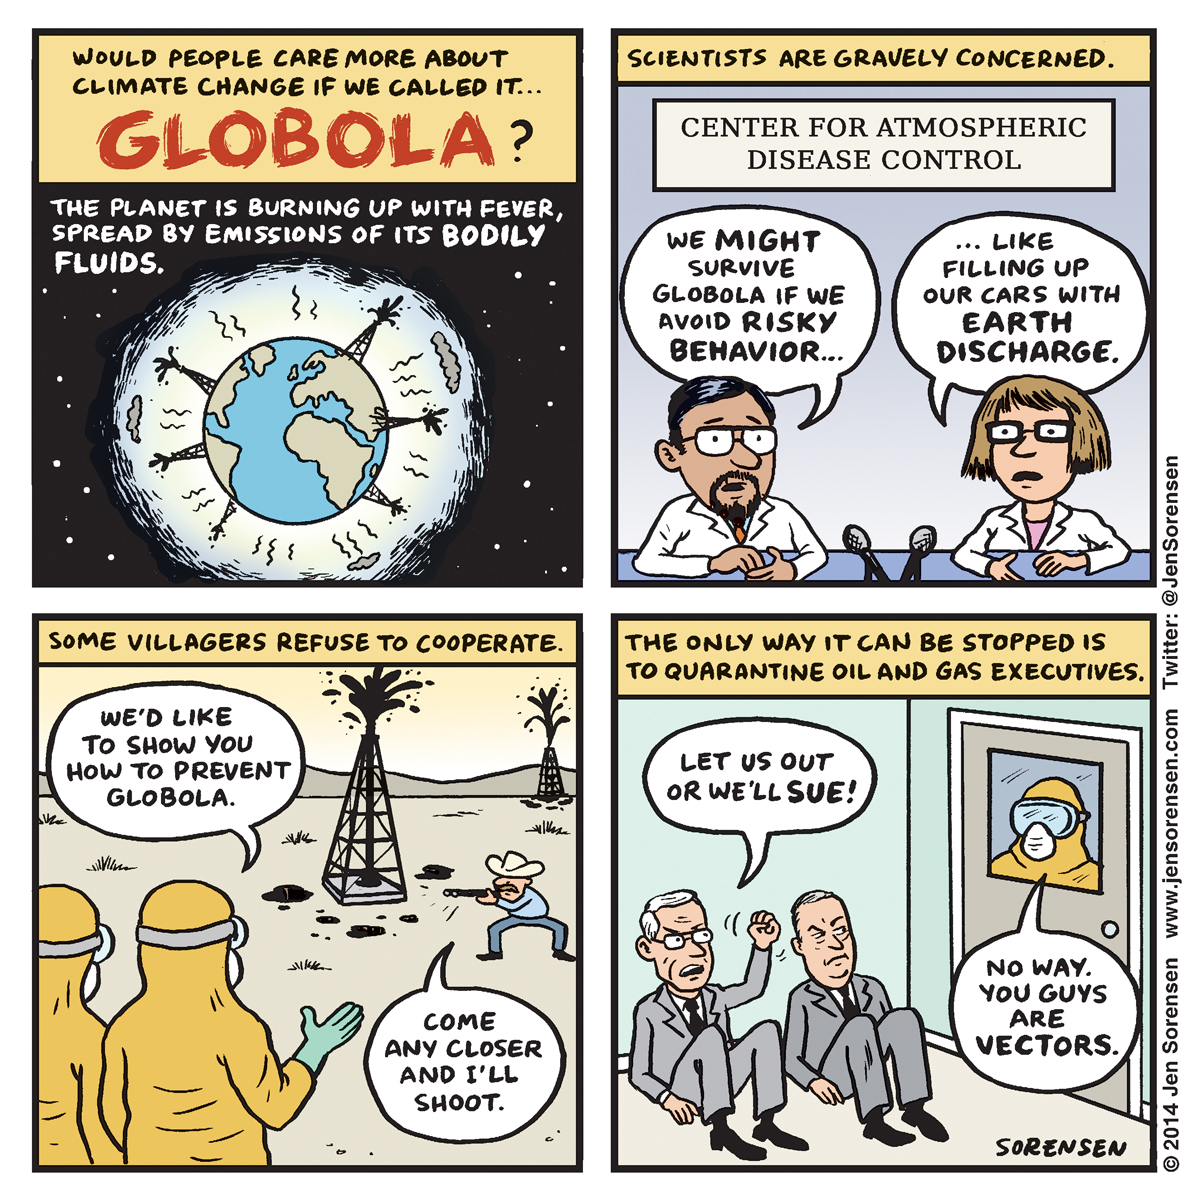 Jen Sorenson’s 2014 cartoon for Fusion contrasted fears about contracting Ebola with the lack of urgency around global warming